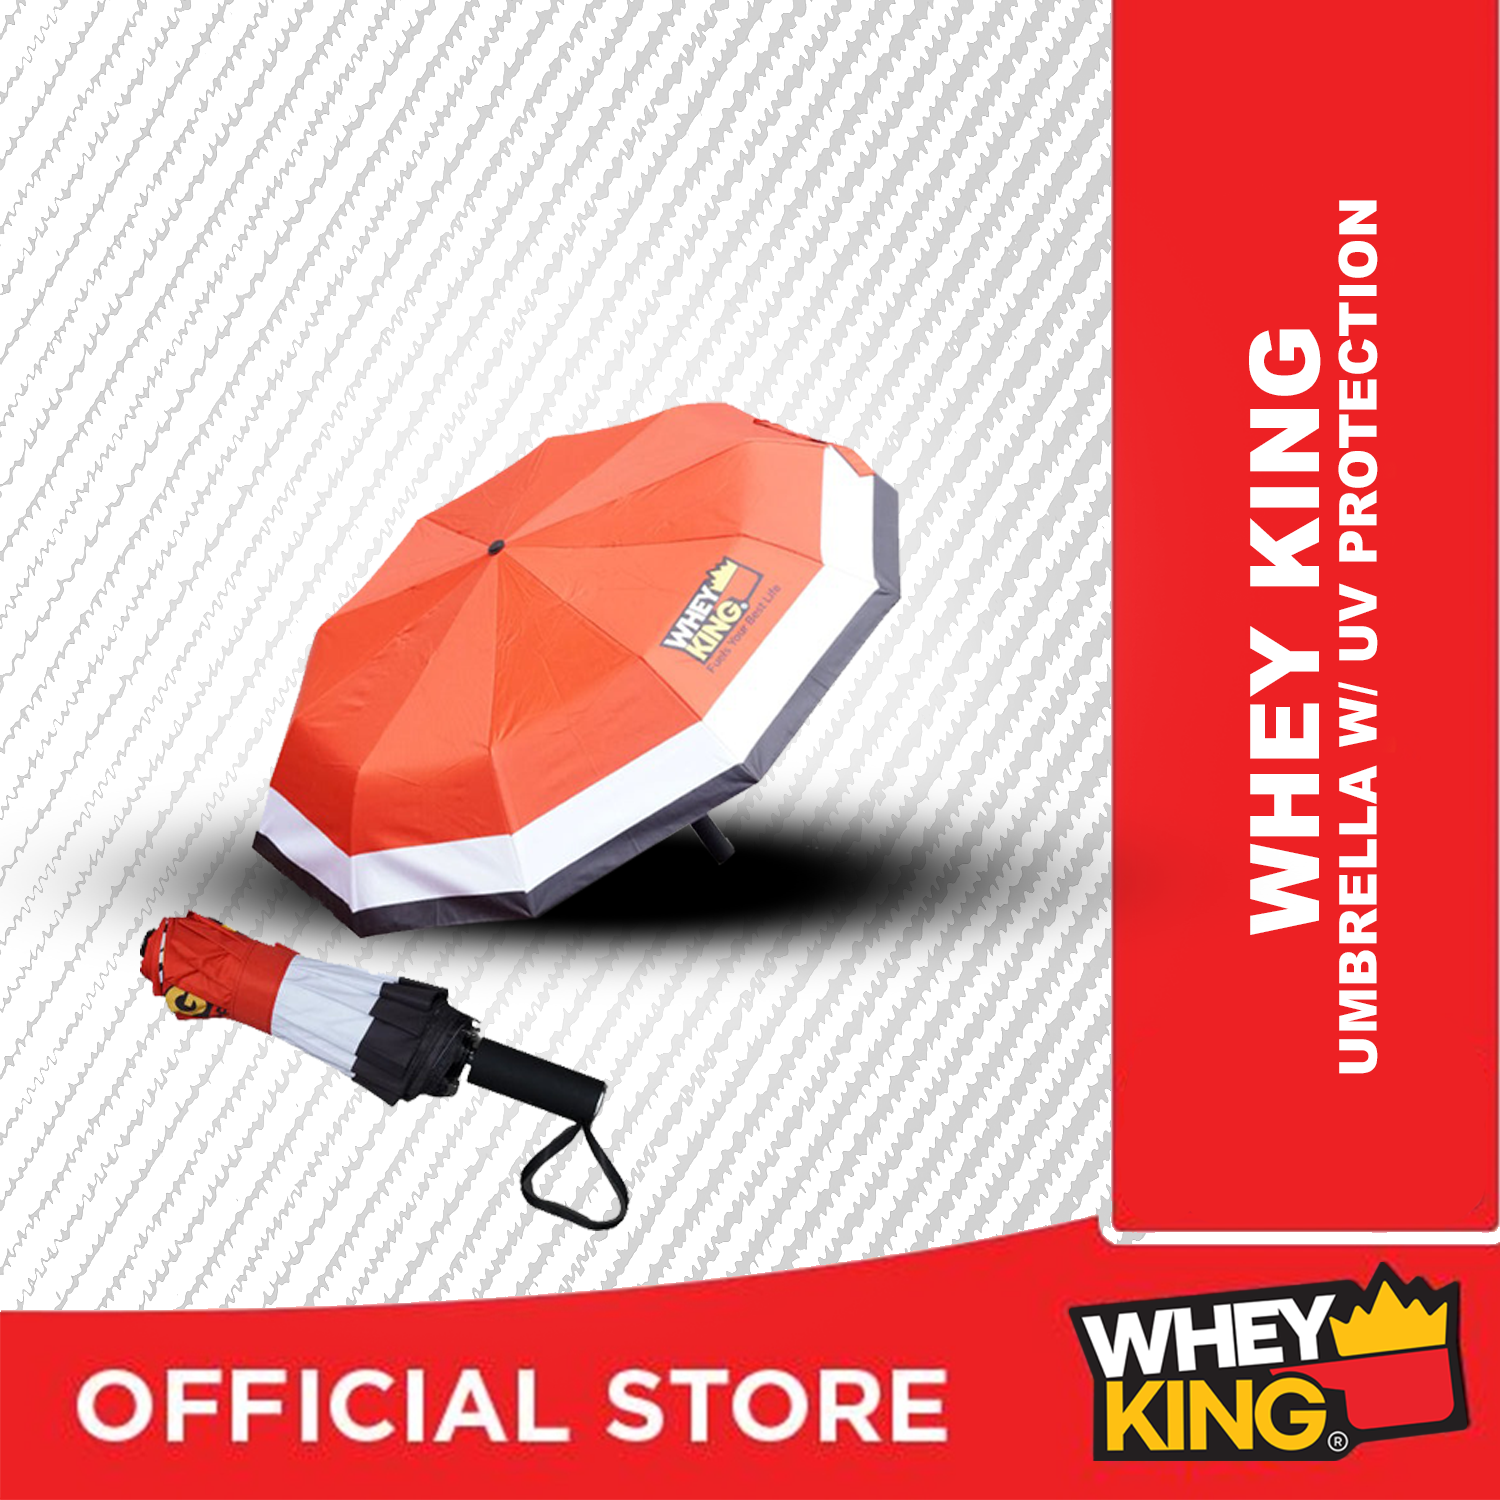 Whey King Compact Umbrella With UV Protection